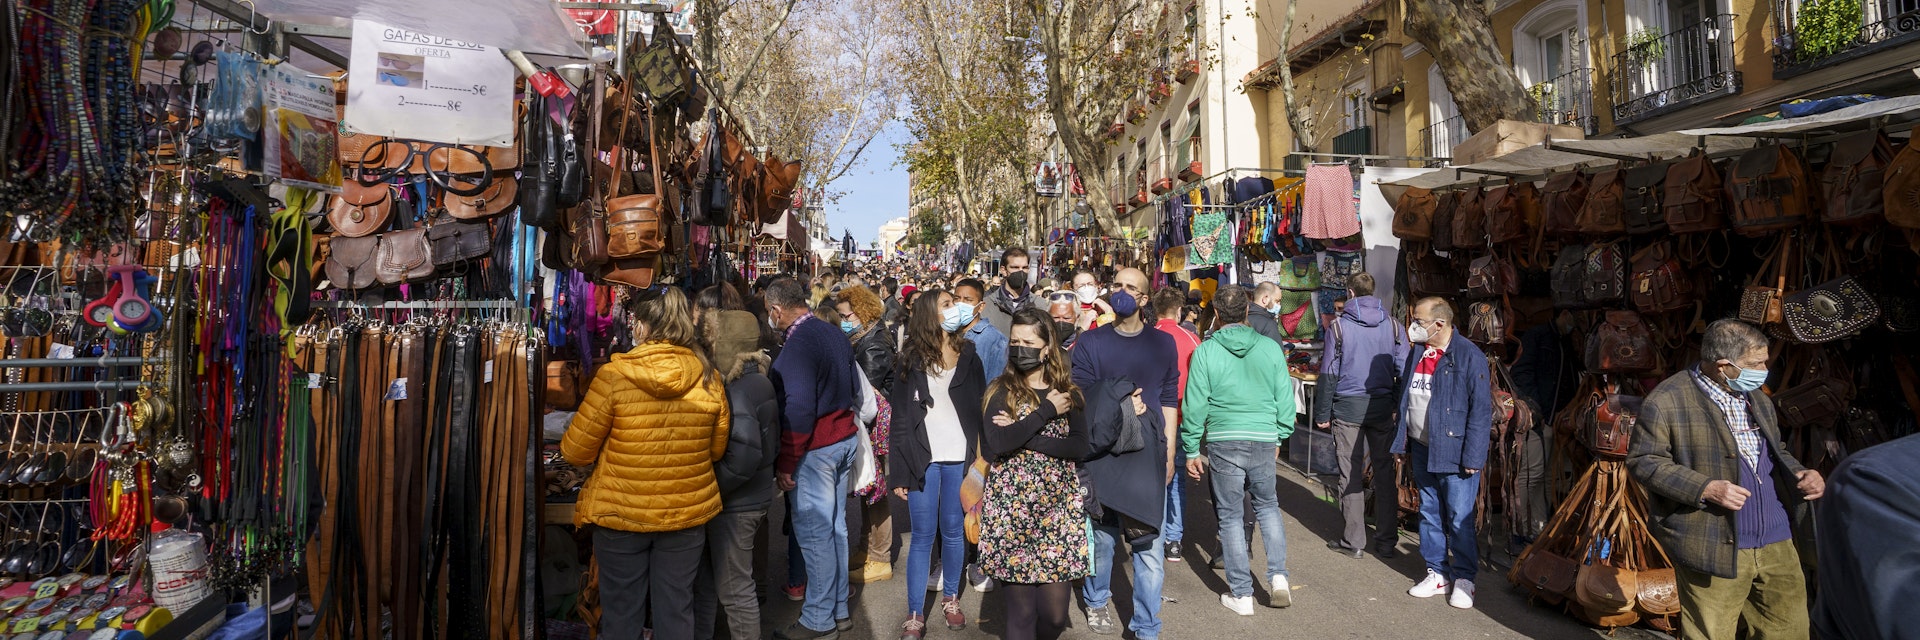 Traditional market in Madrid during a sunny day with many people shopping, Rastro de Madrid